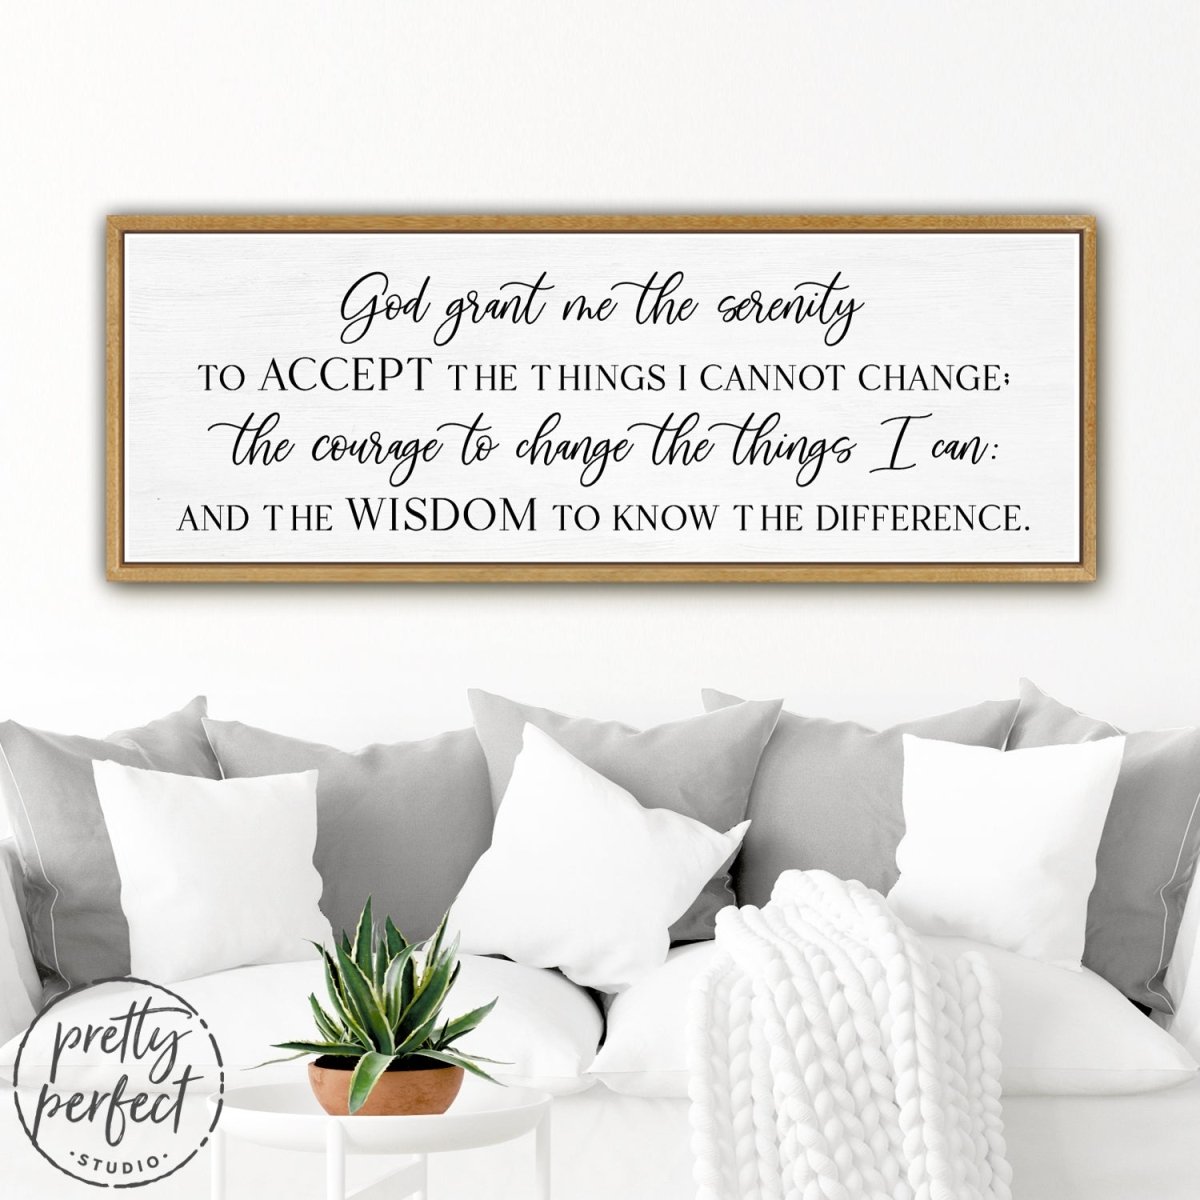 Serenity Prayer Sign Above Couch - Motivational Wall Art - Pretty Perfect Studio